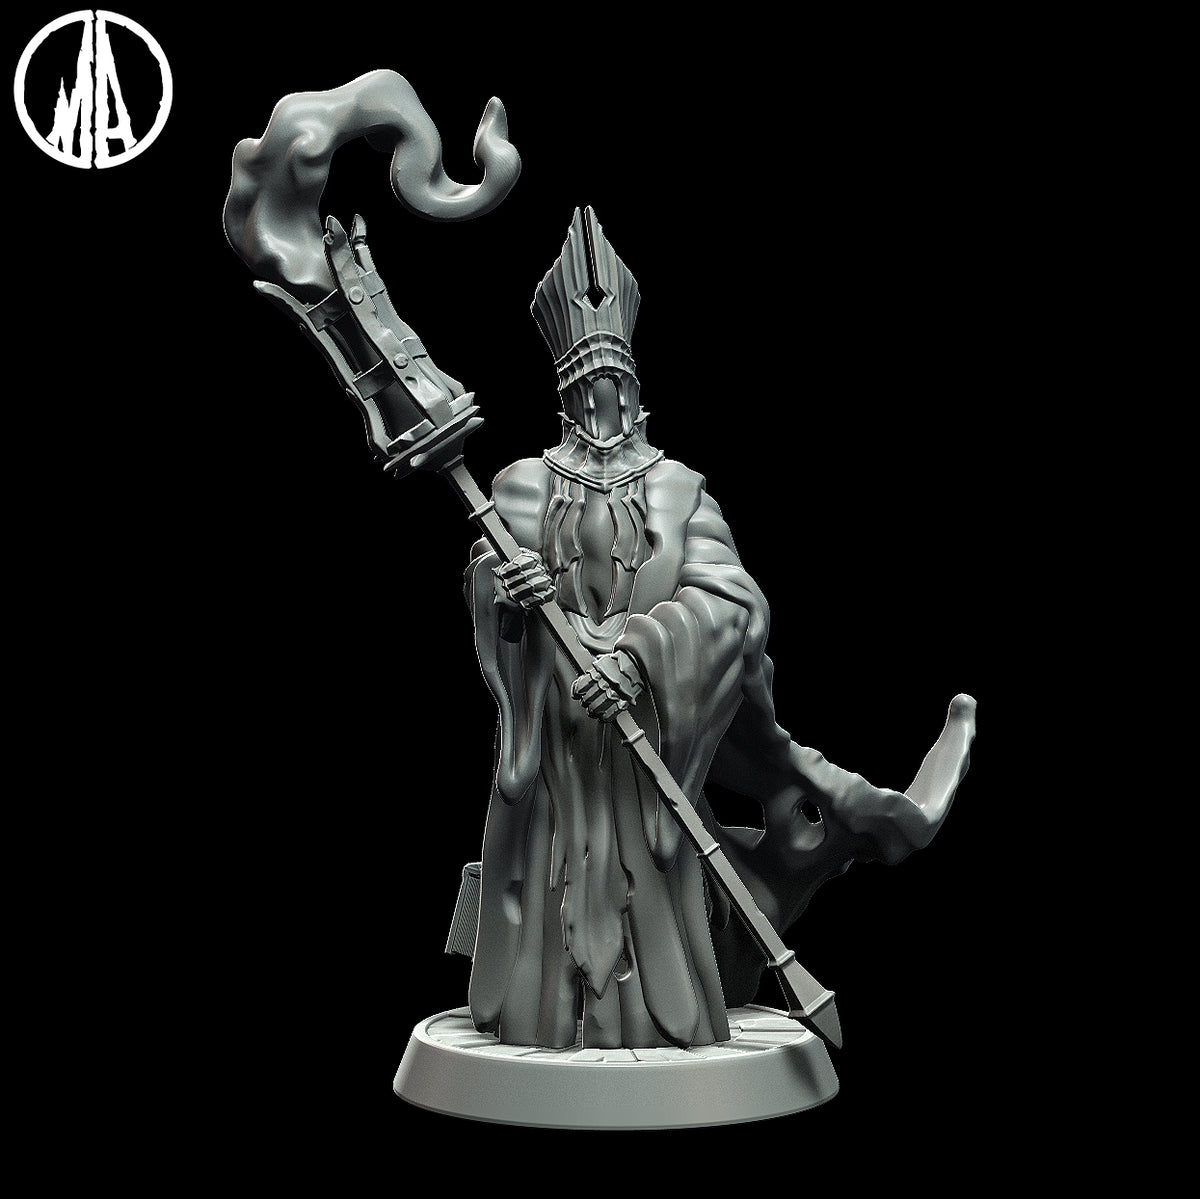 Insane Cleric | 32mm Scale Resin Model | From the Lost Souls Collection